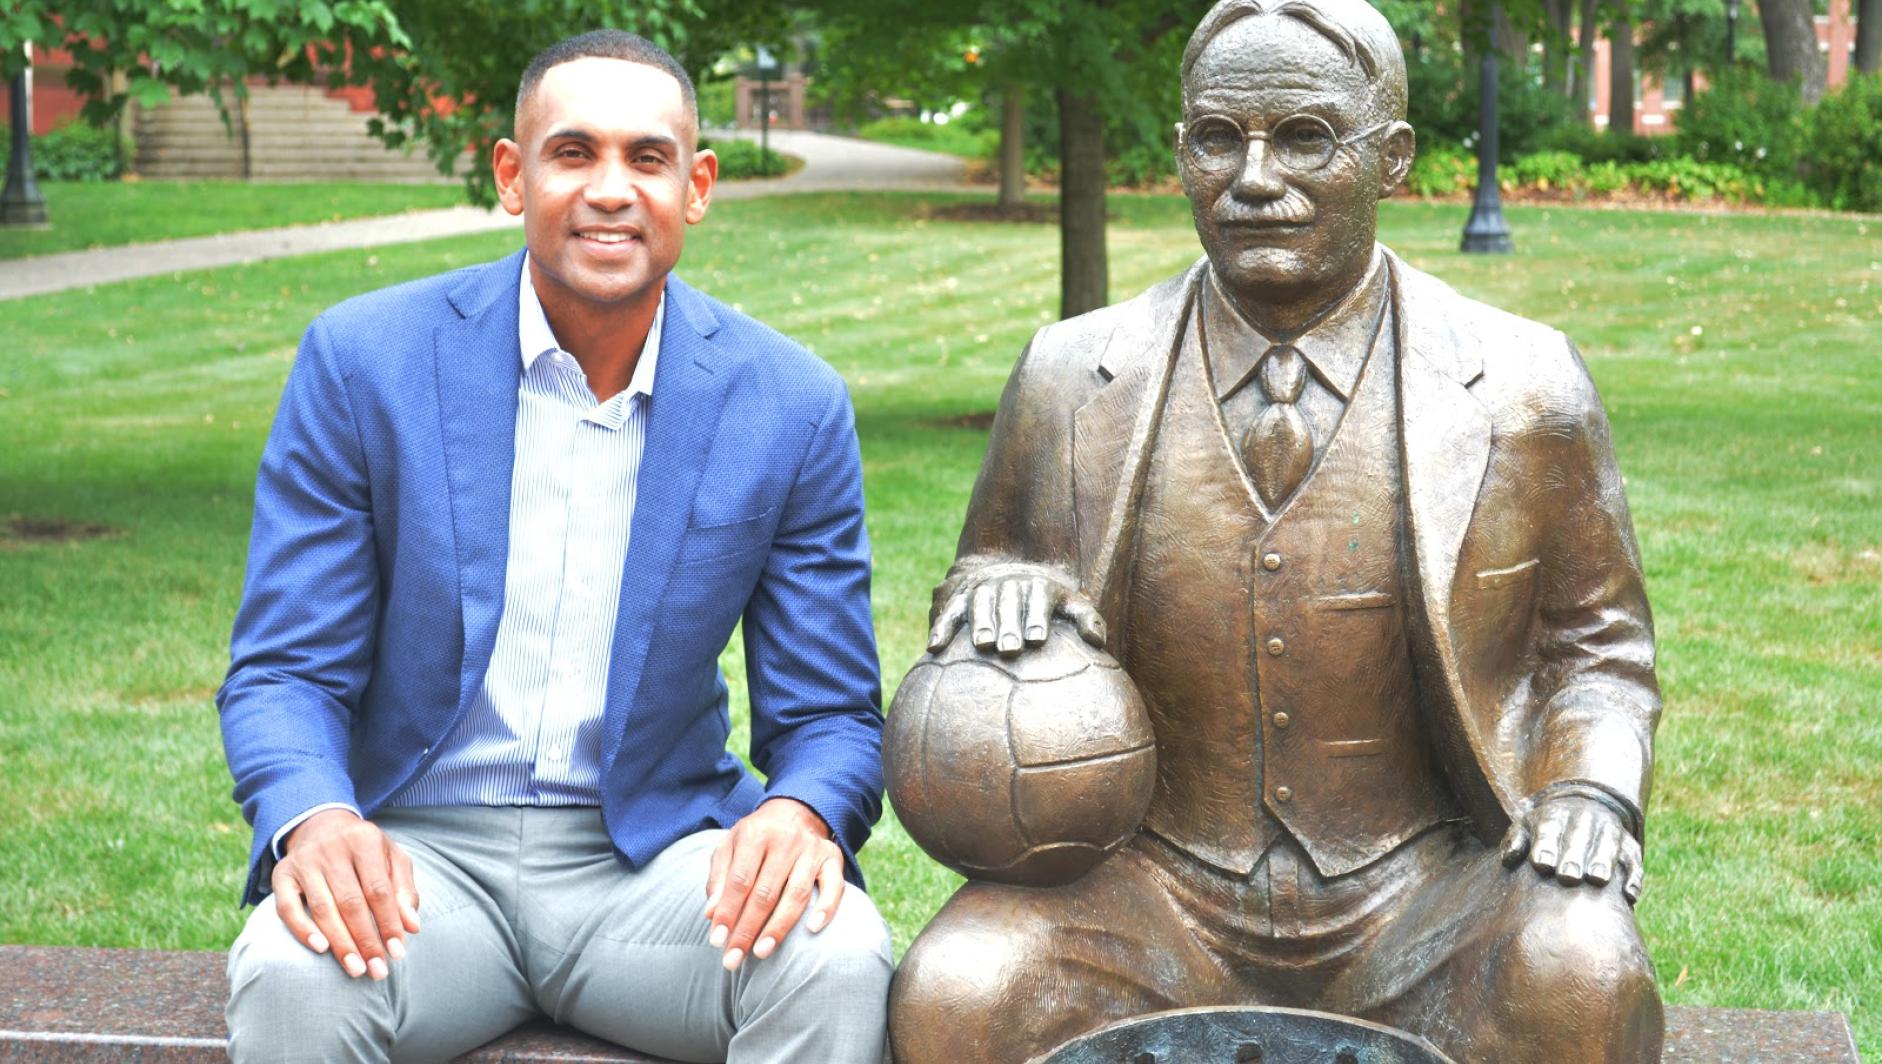 Grant Hill sitting next to the Naismith Statue